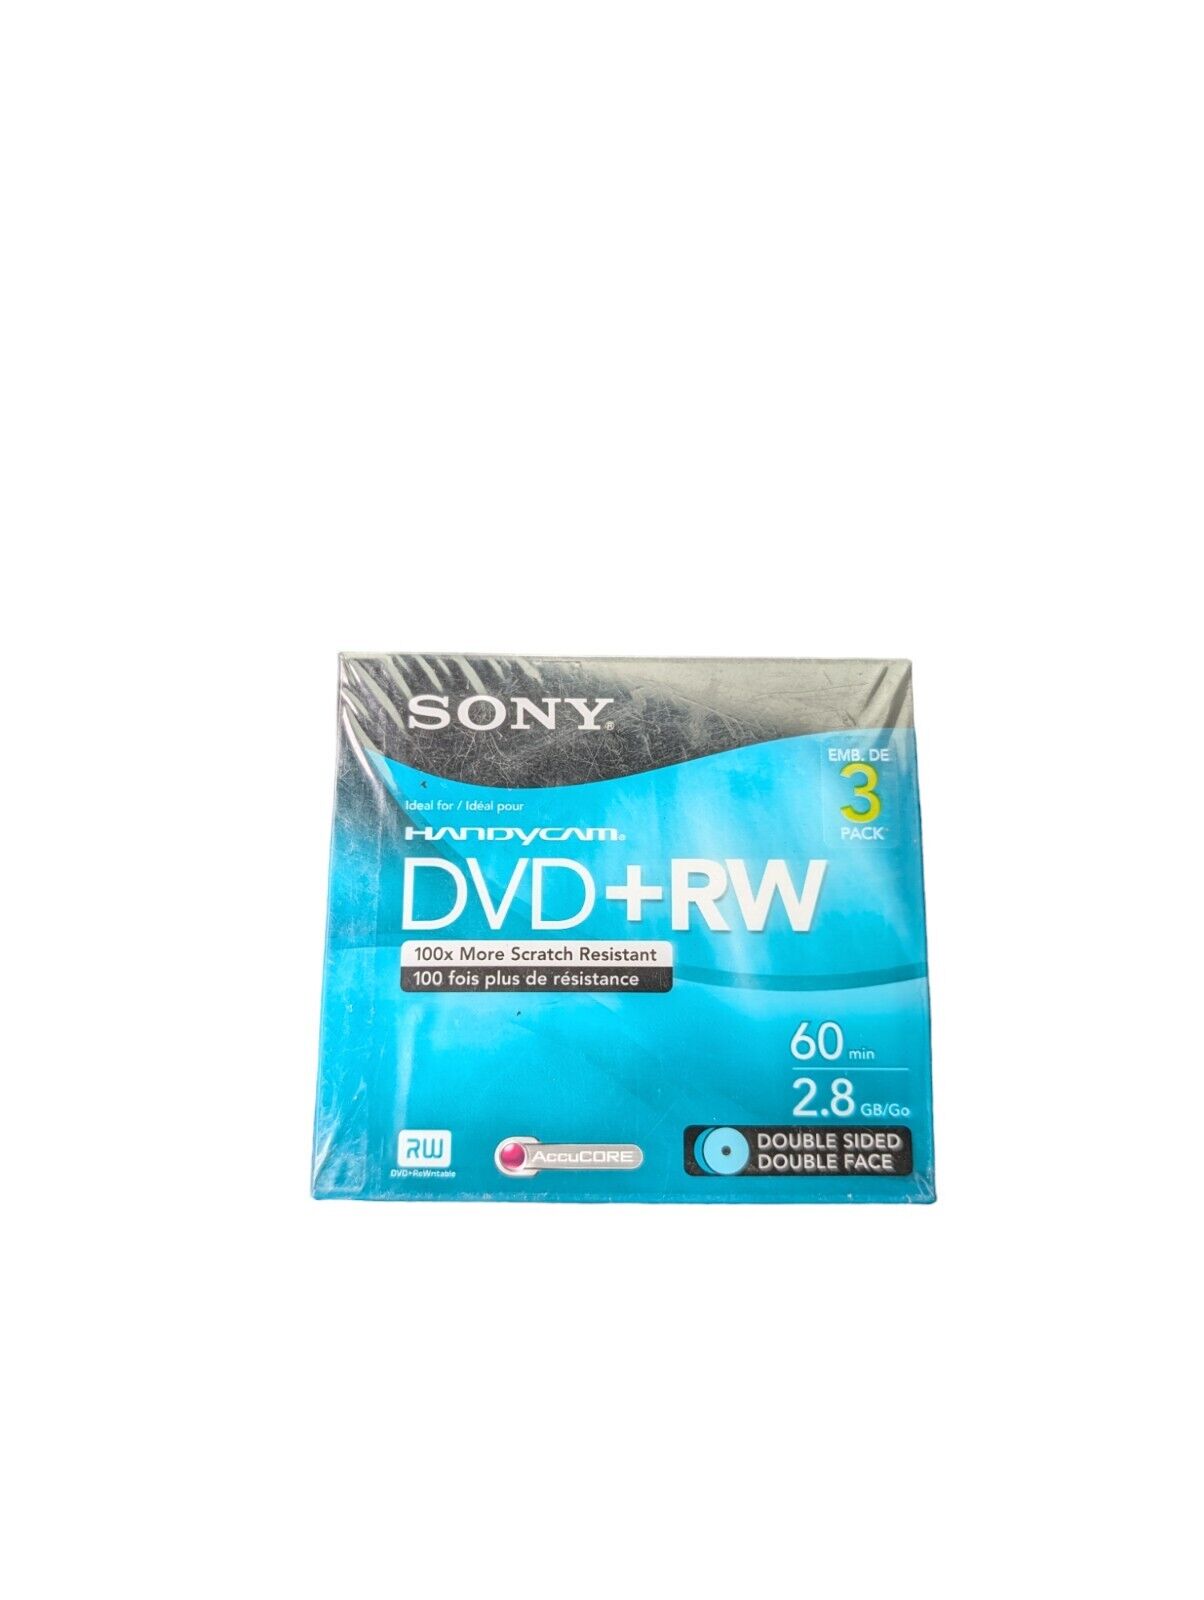 Sony 8cm DVD+RW Recordable Disc (Jewel Case Pack of 3) New